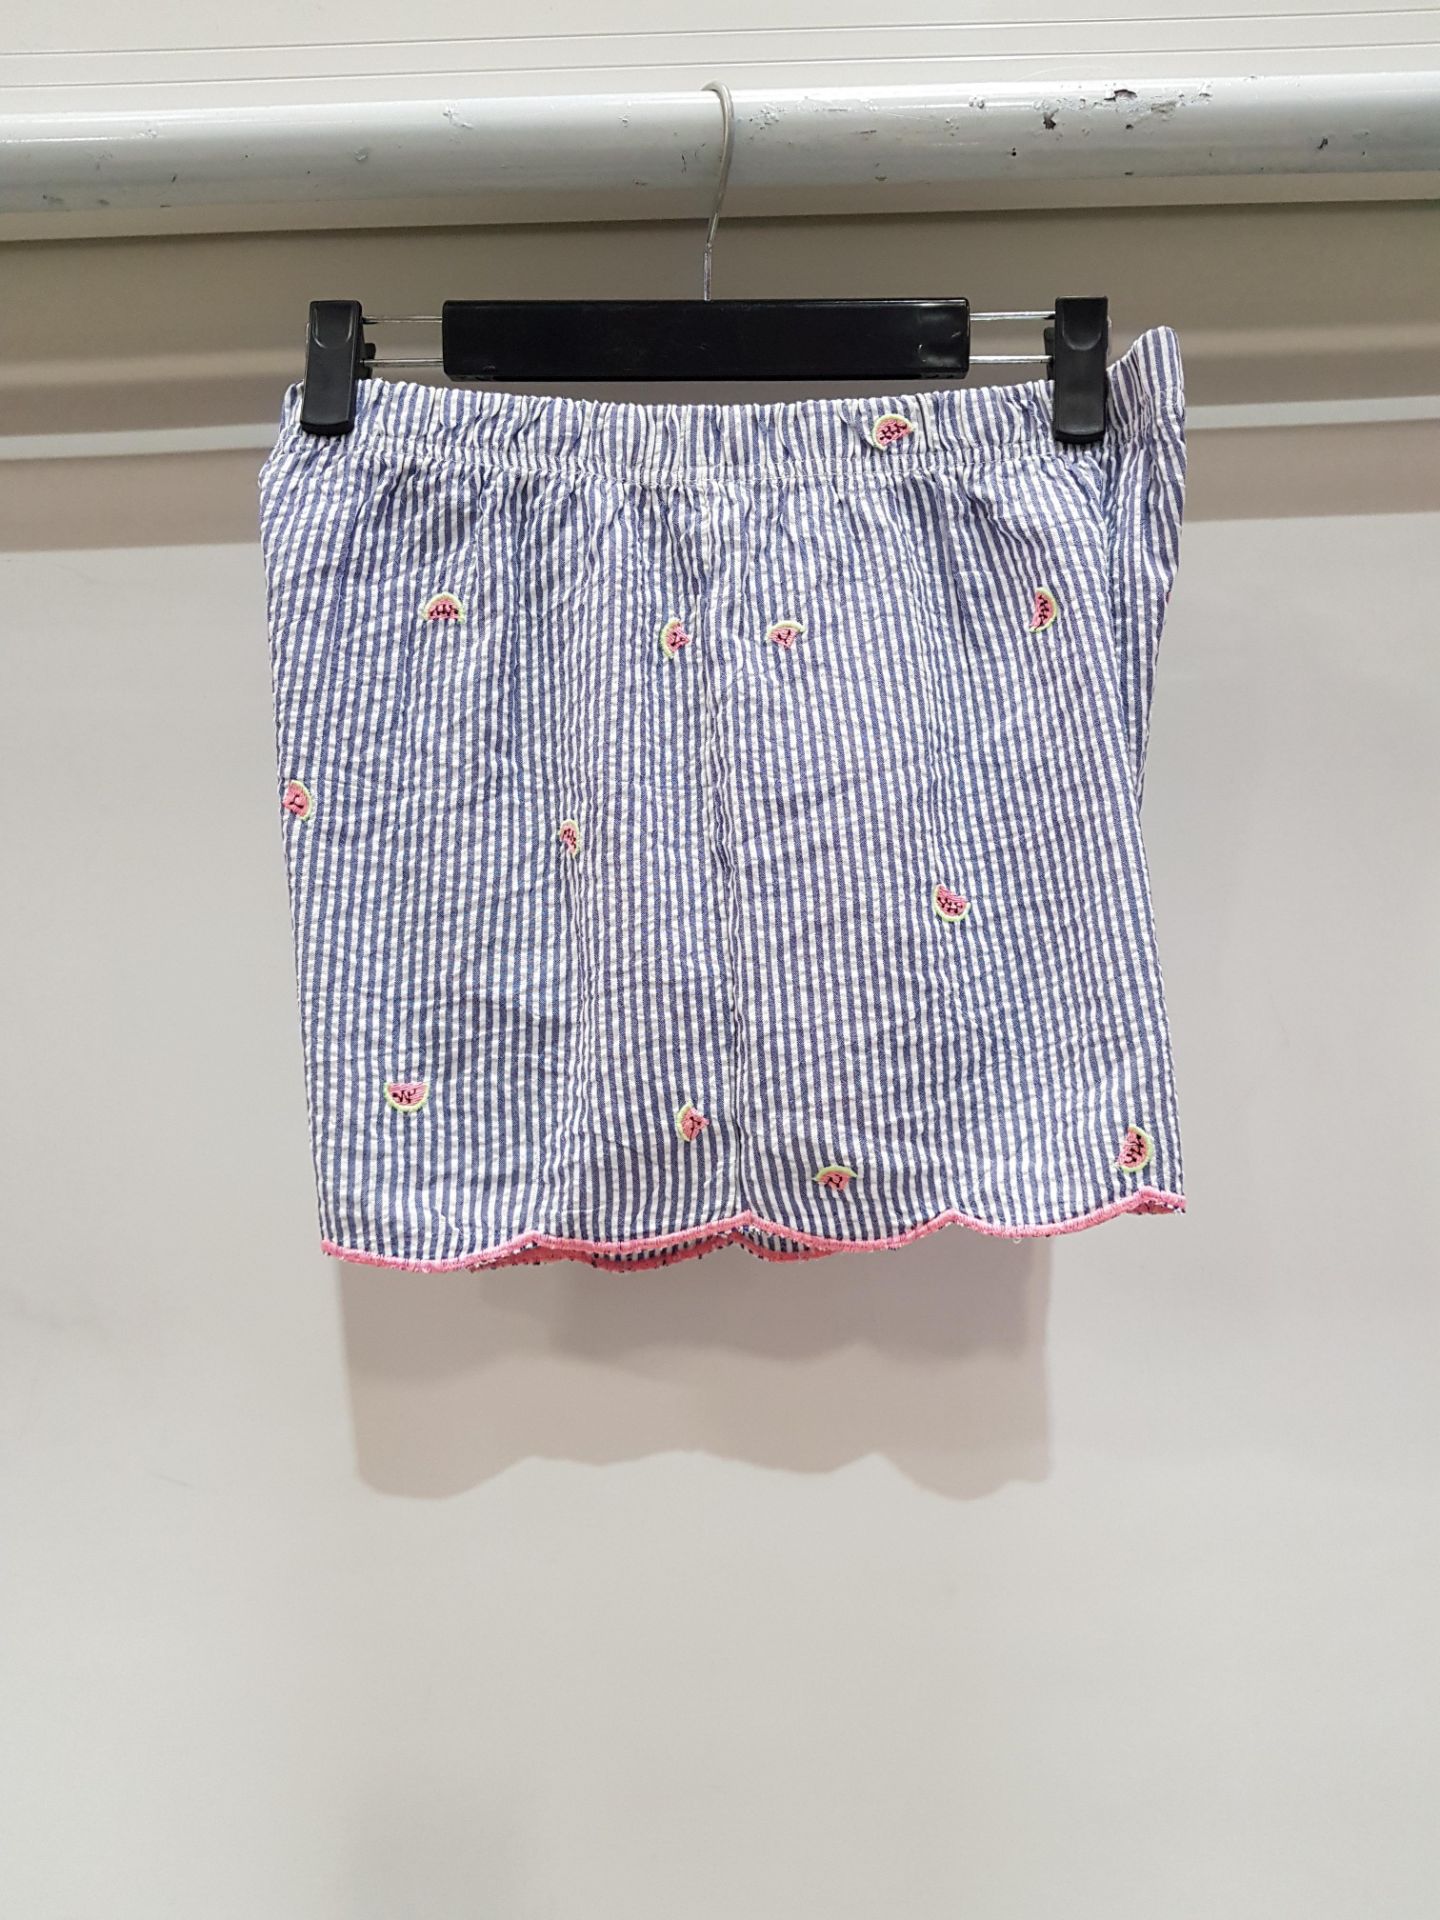 225 X BRAND NEW GEORGE STRIPE PRINT SHORTS IN MIXED SIZES TO INCLUDE 8-10 AND 12-14